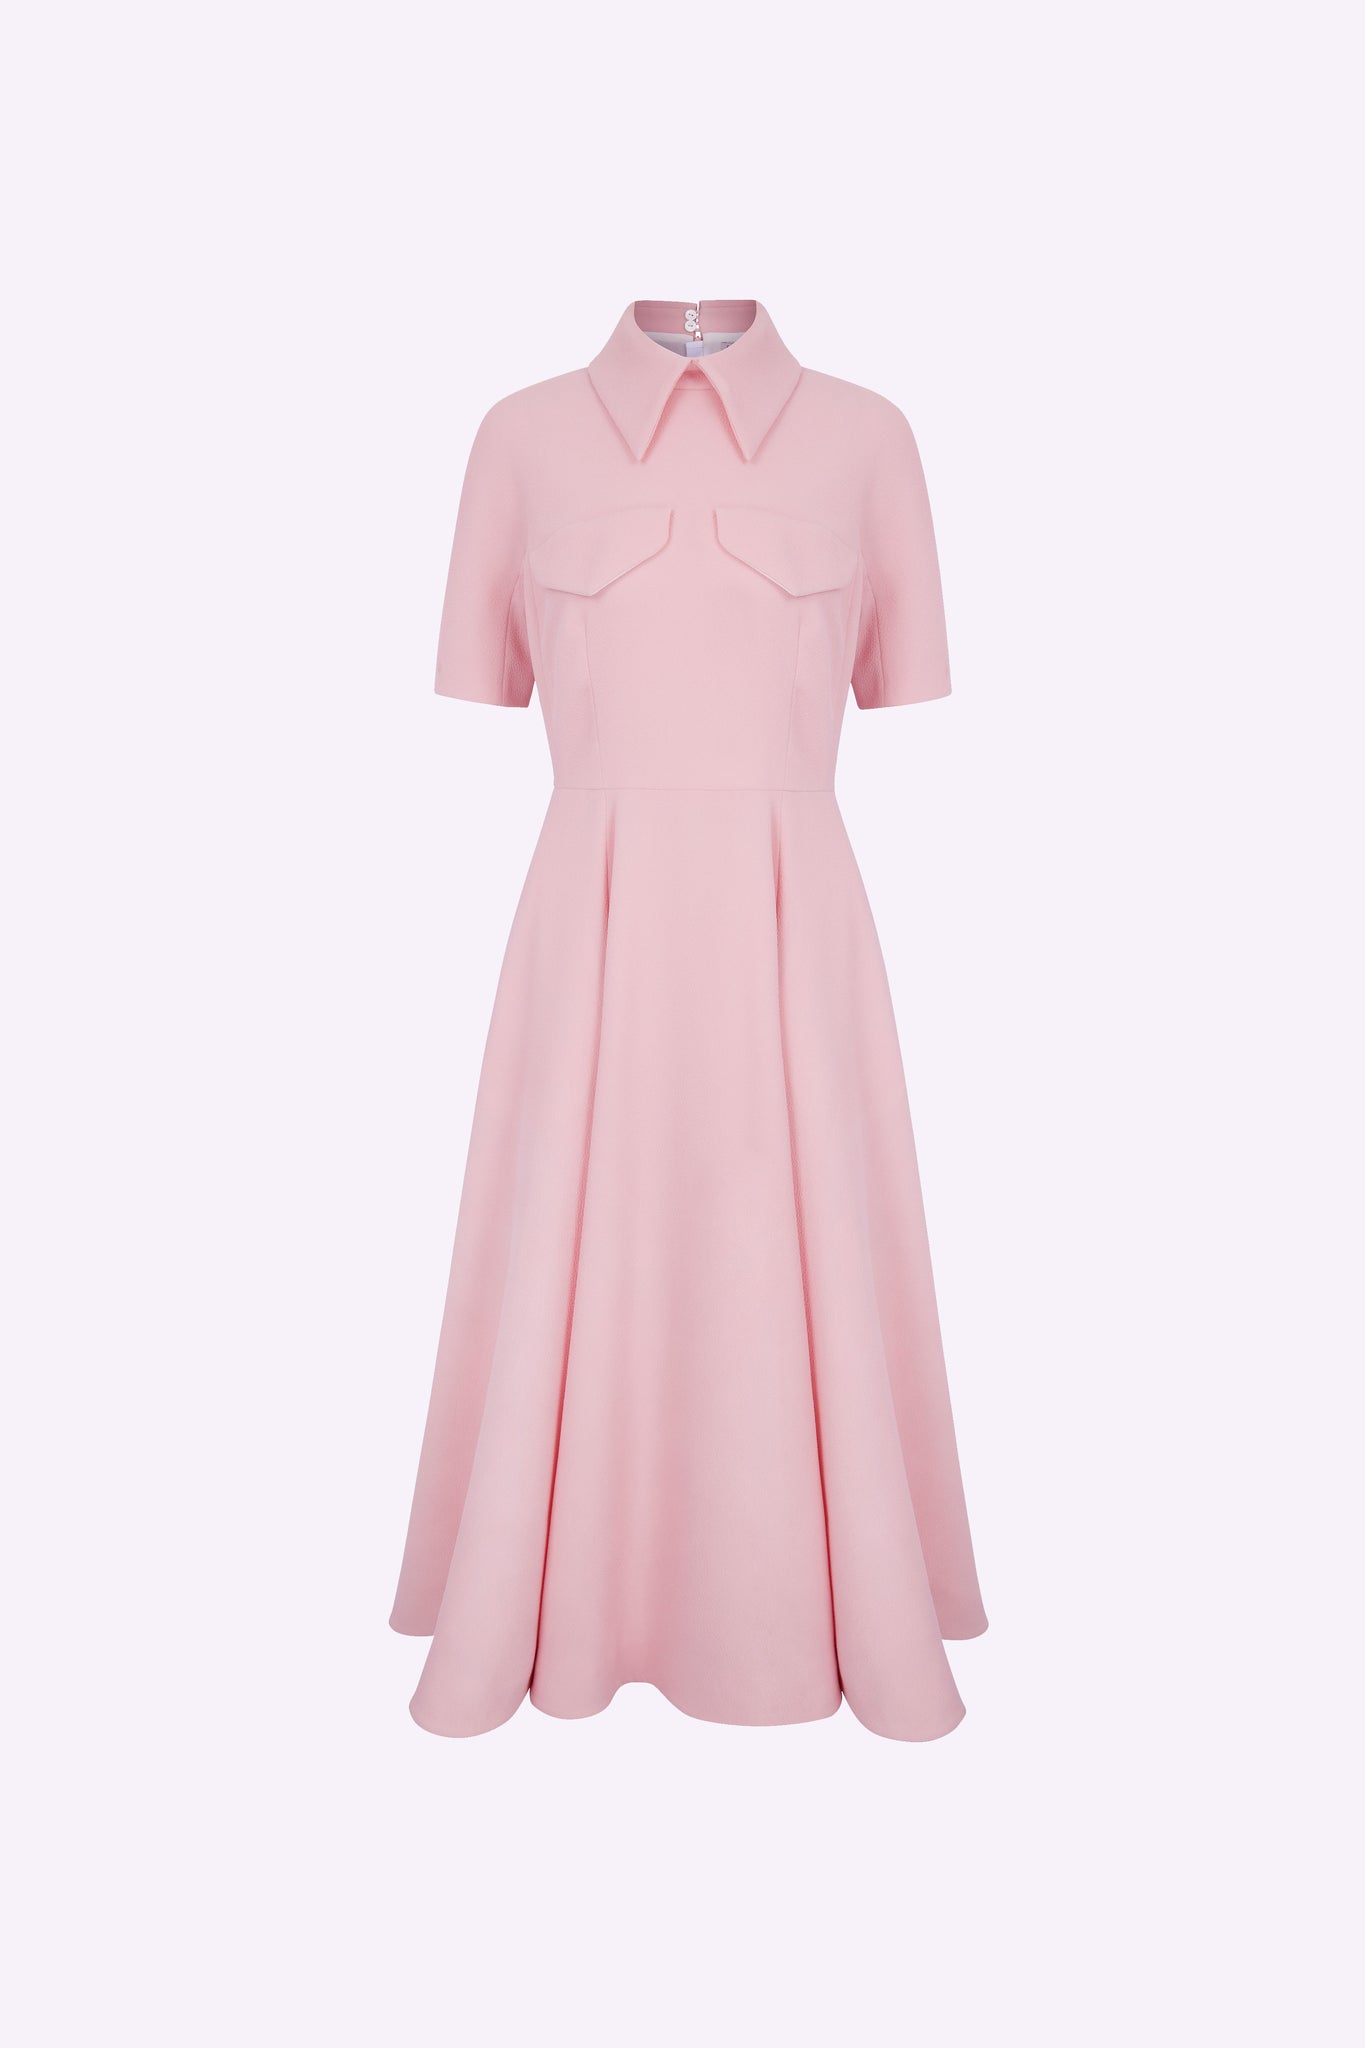 Alice Dress | Baby Pink Fit-and-Flare Tailored Dress in Double Crepe | Emilia Wickstead